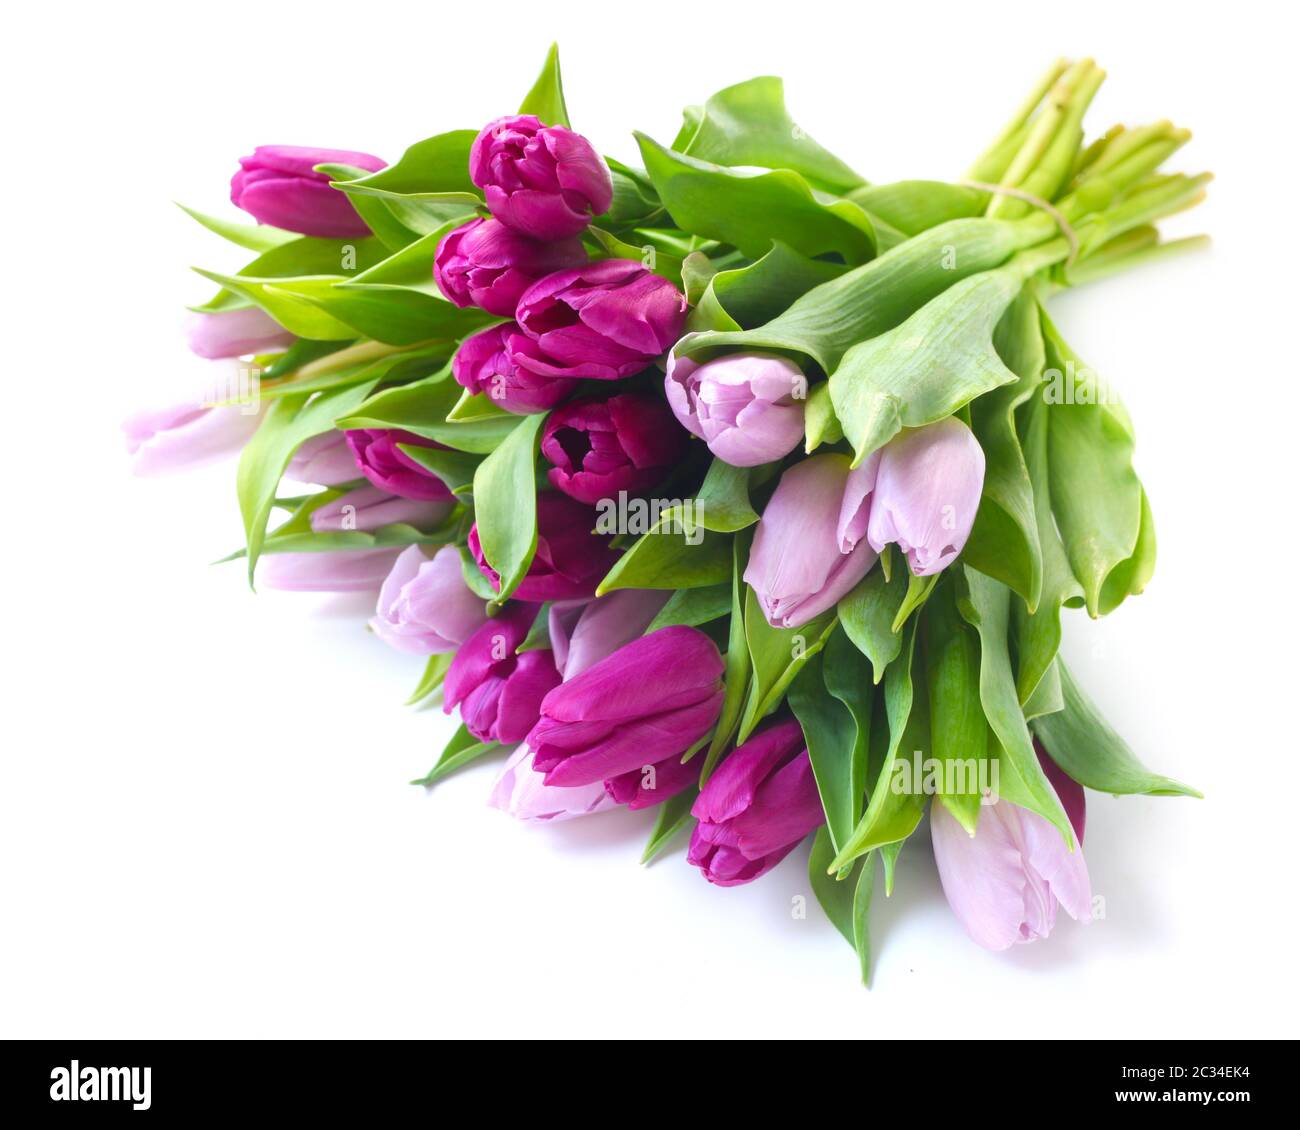 A Bunch Of Purple Tulips Isolated On White Stock Photo